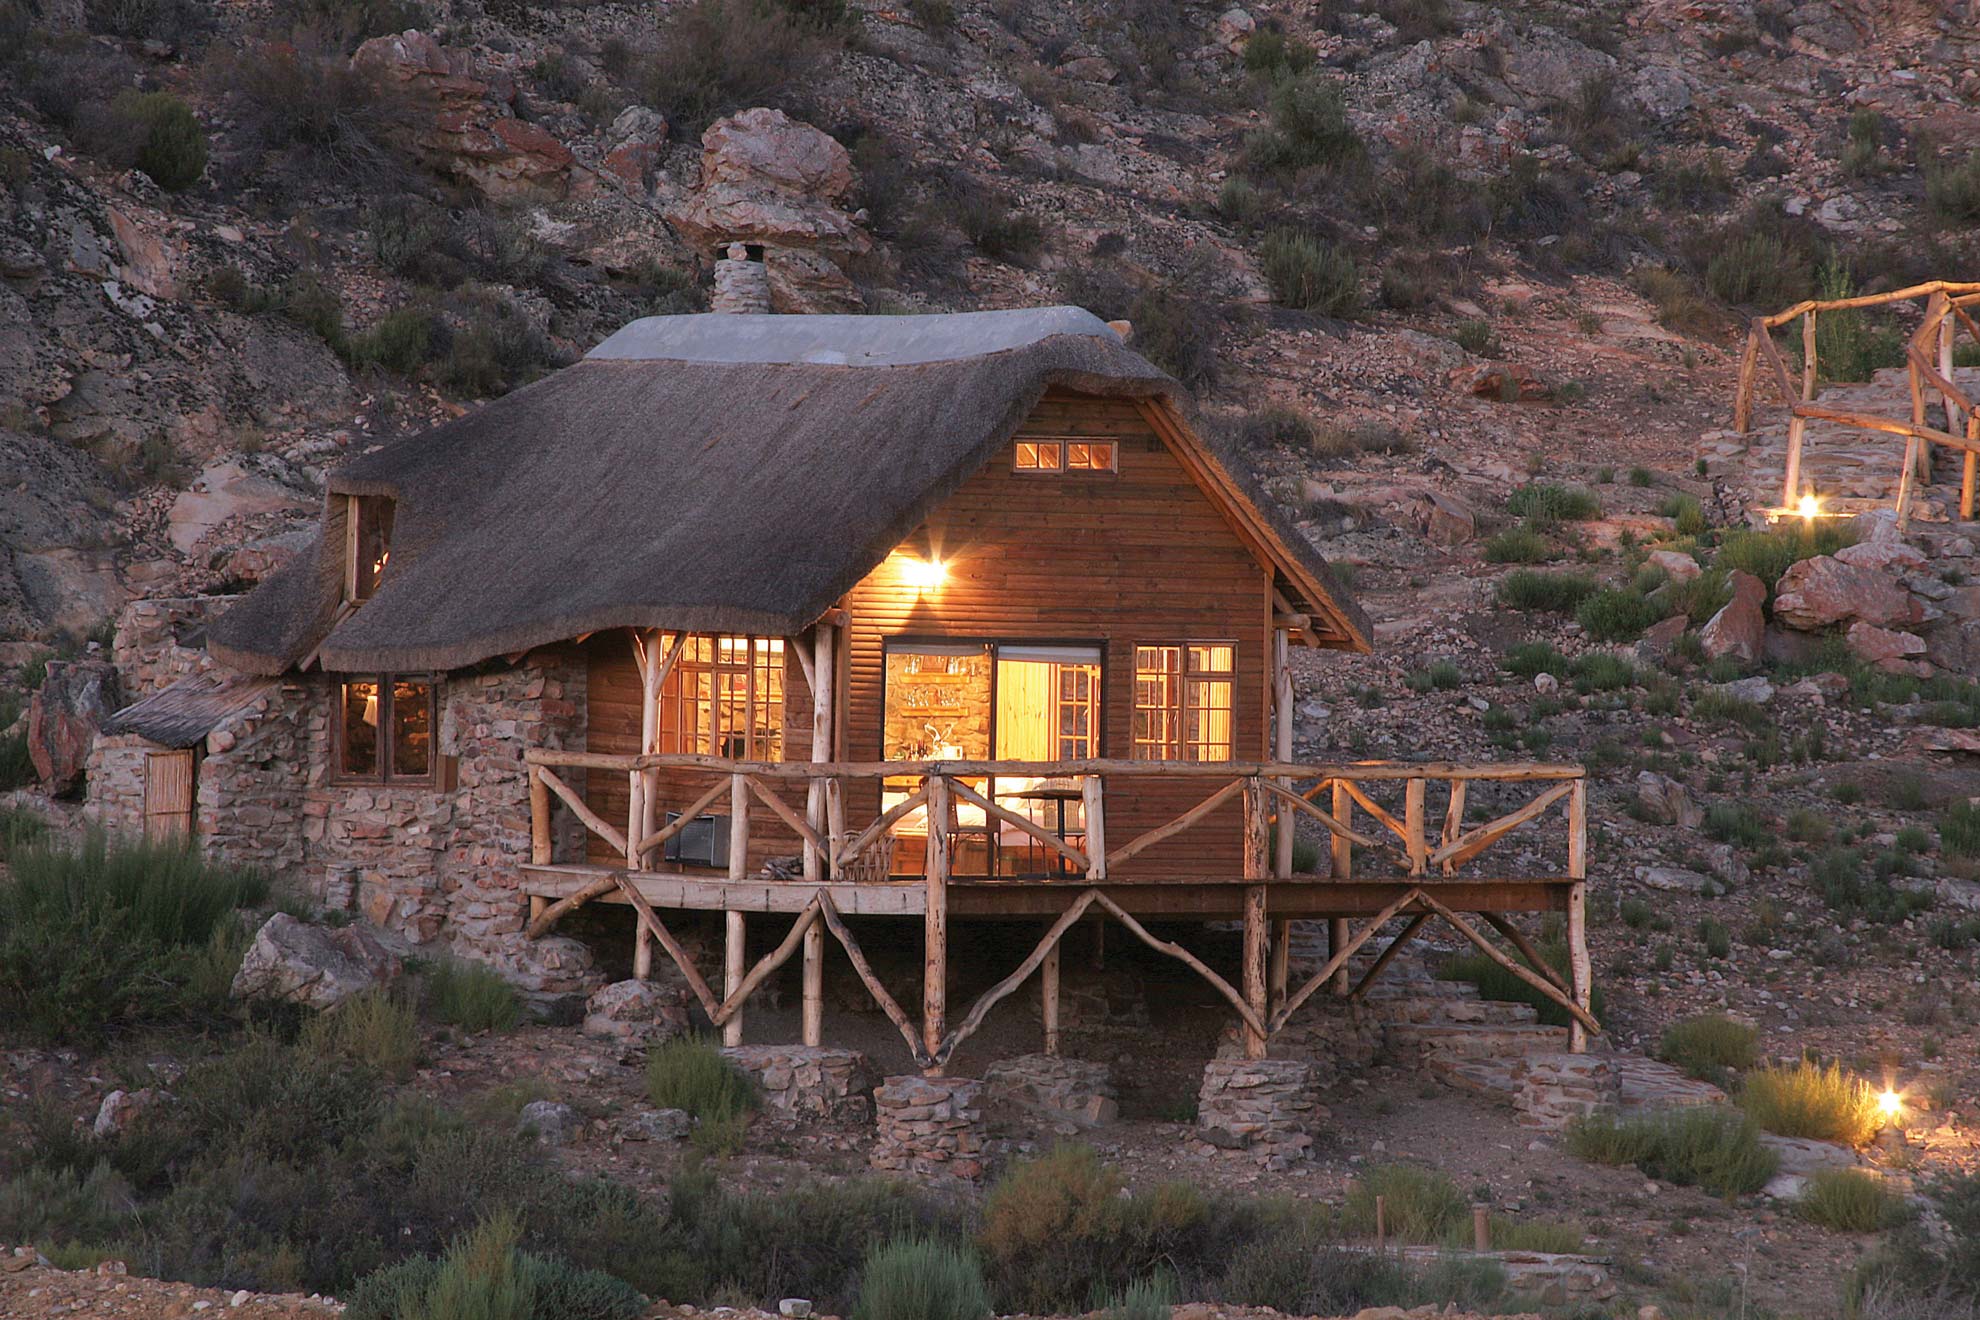 Premier Cottage, set against the rocky Karoo hillside, at night and with the lights on. Shown as part of Aquila's luxury overnight safari package.